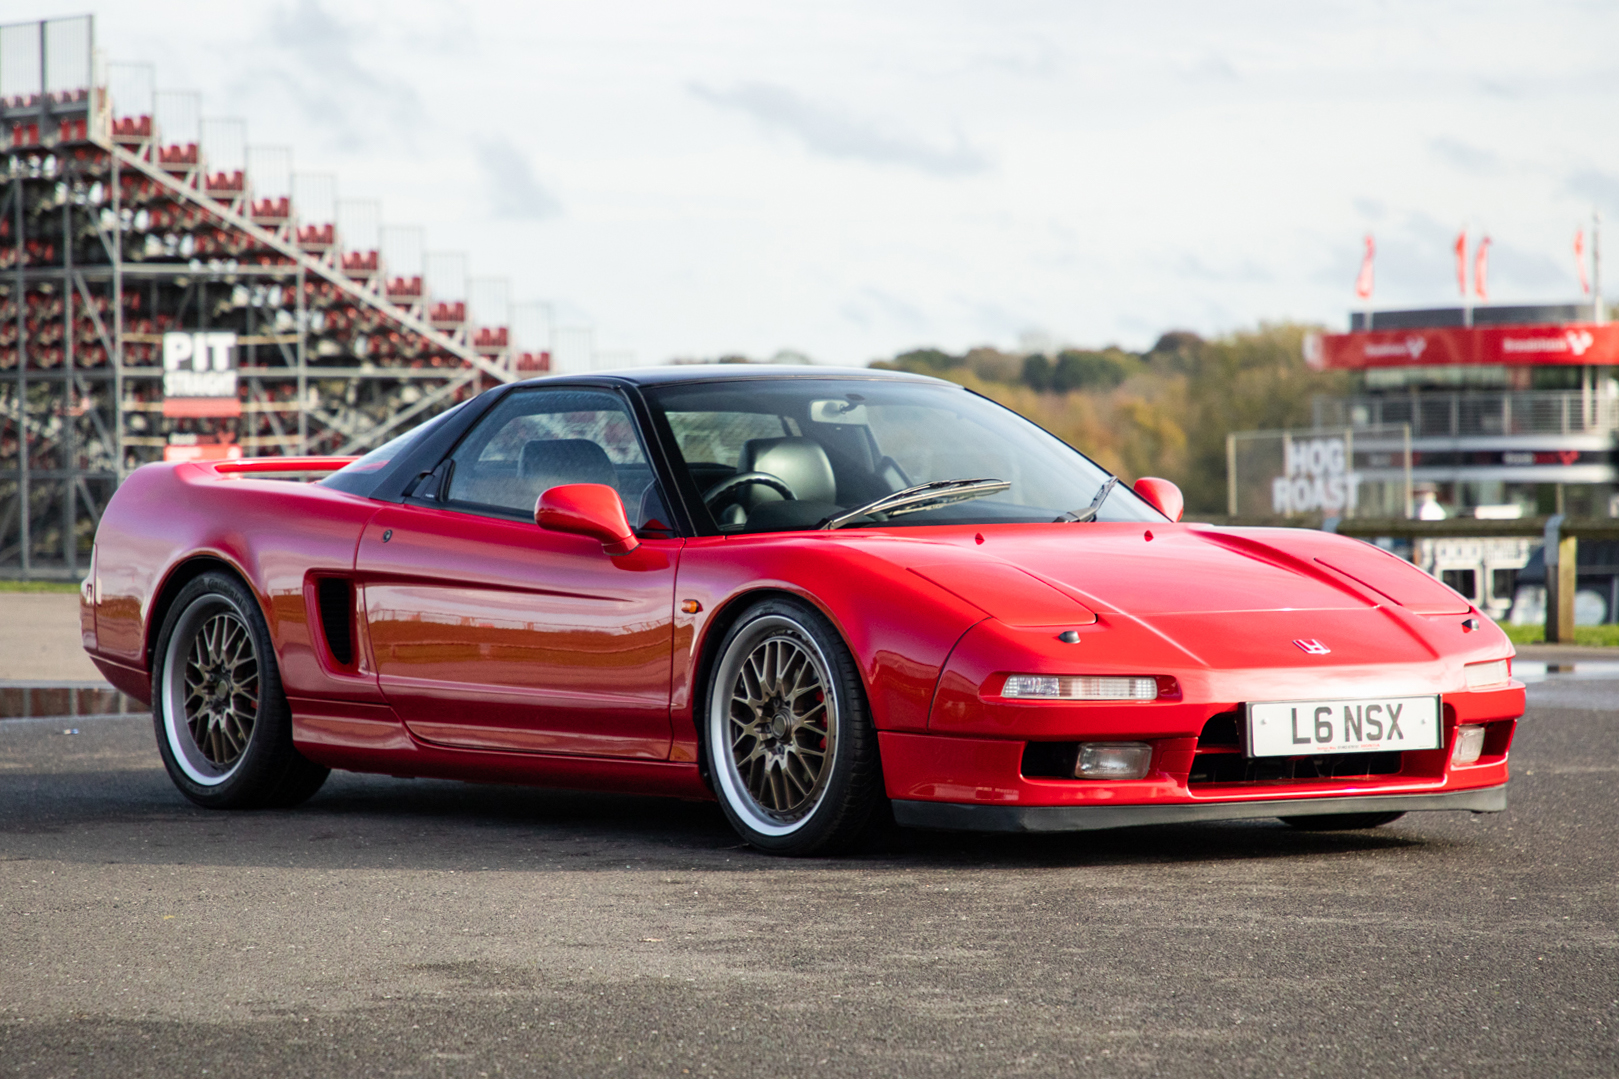 1995 HONDA NSX - MANUAL for sale by auction in Longfield, Kent